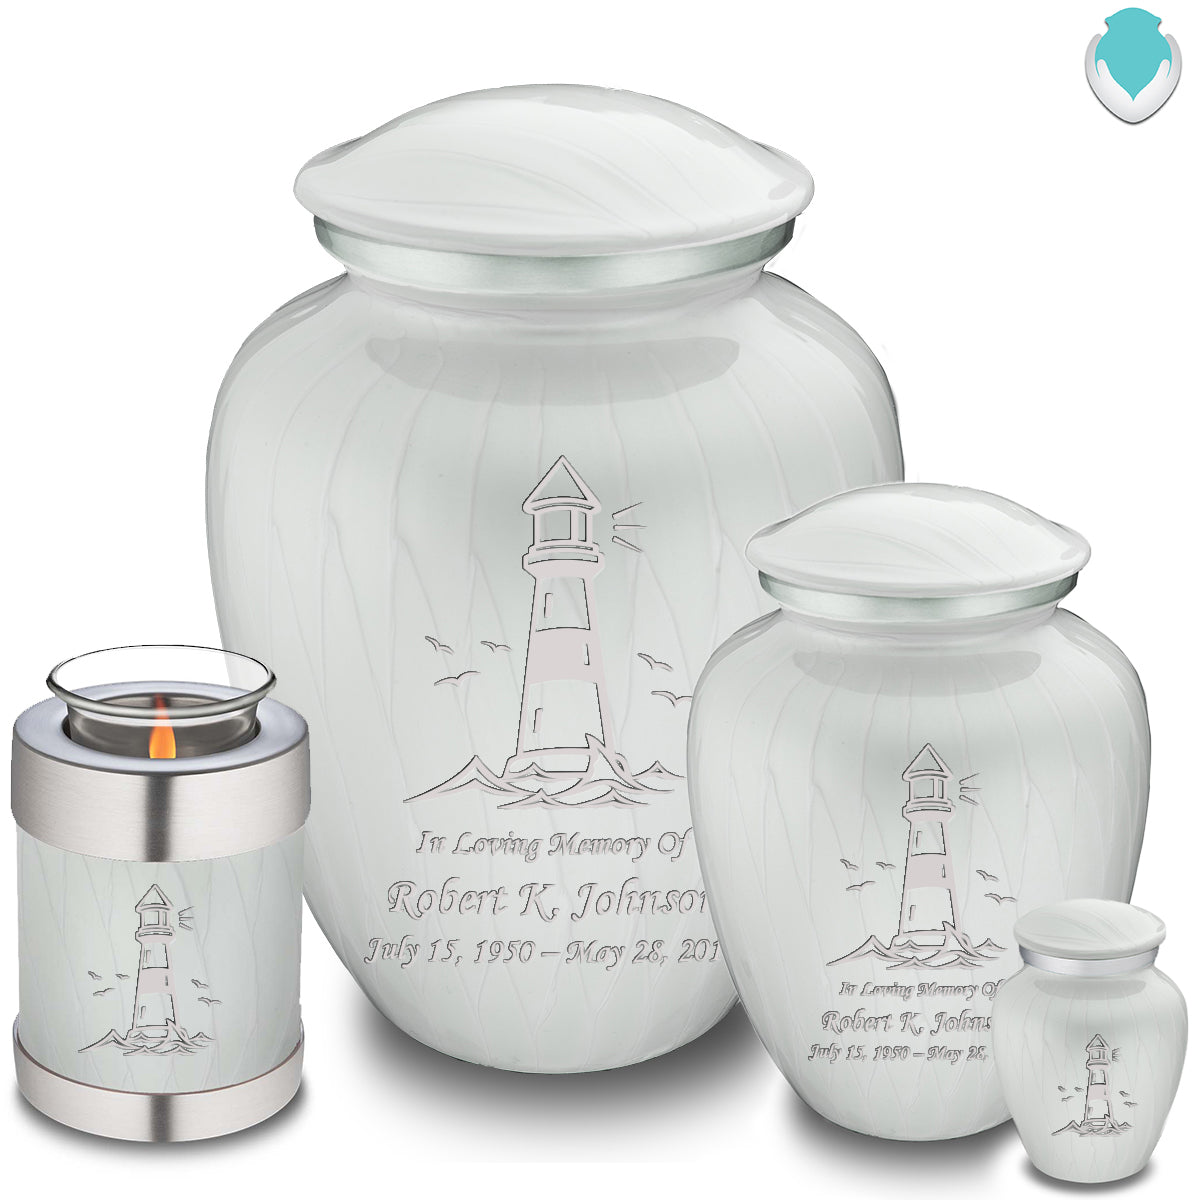 Adult Embrace Pearl White Lighthouse Cremation Urn